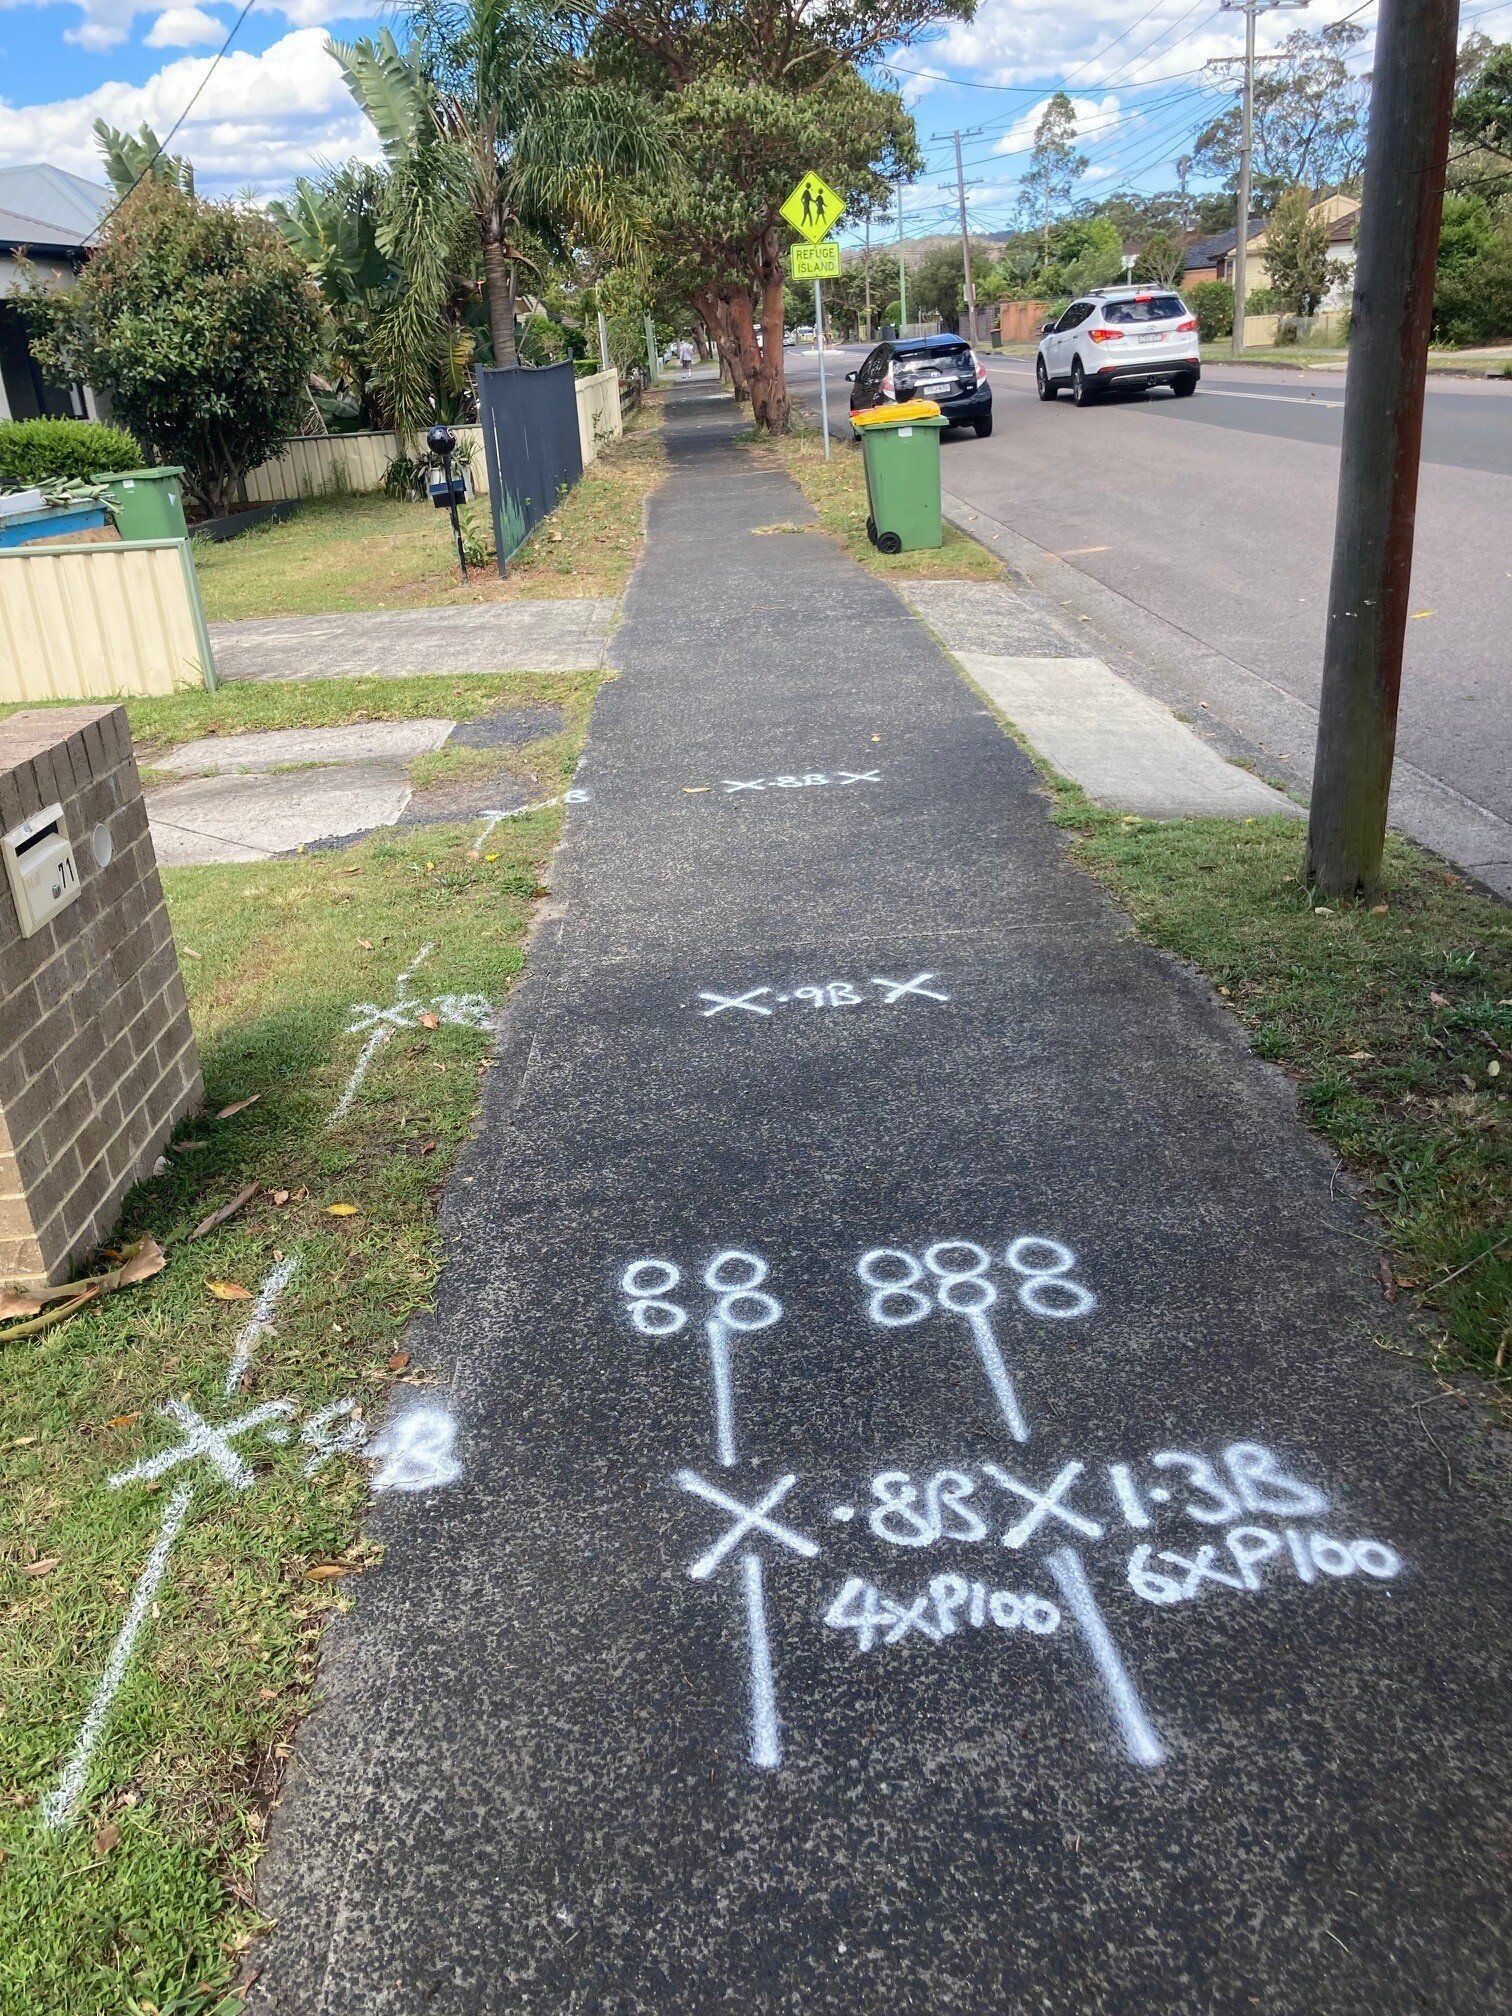 Underground Utility Markings on Footpath— East Coast Locating Services in Wallalong, NSW